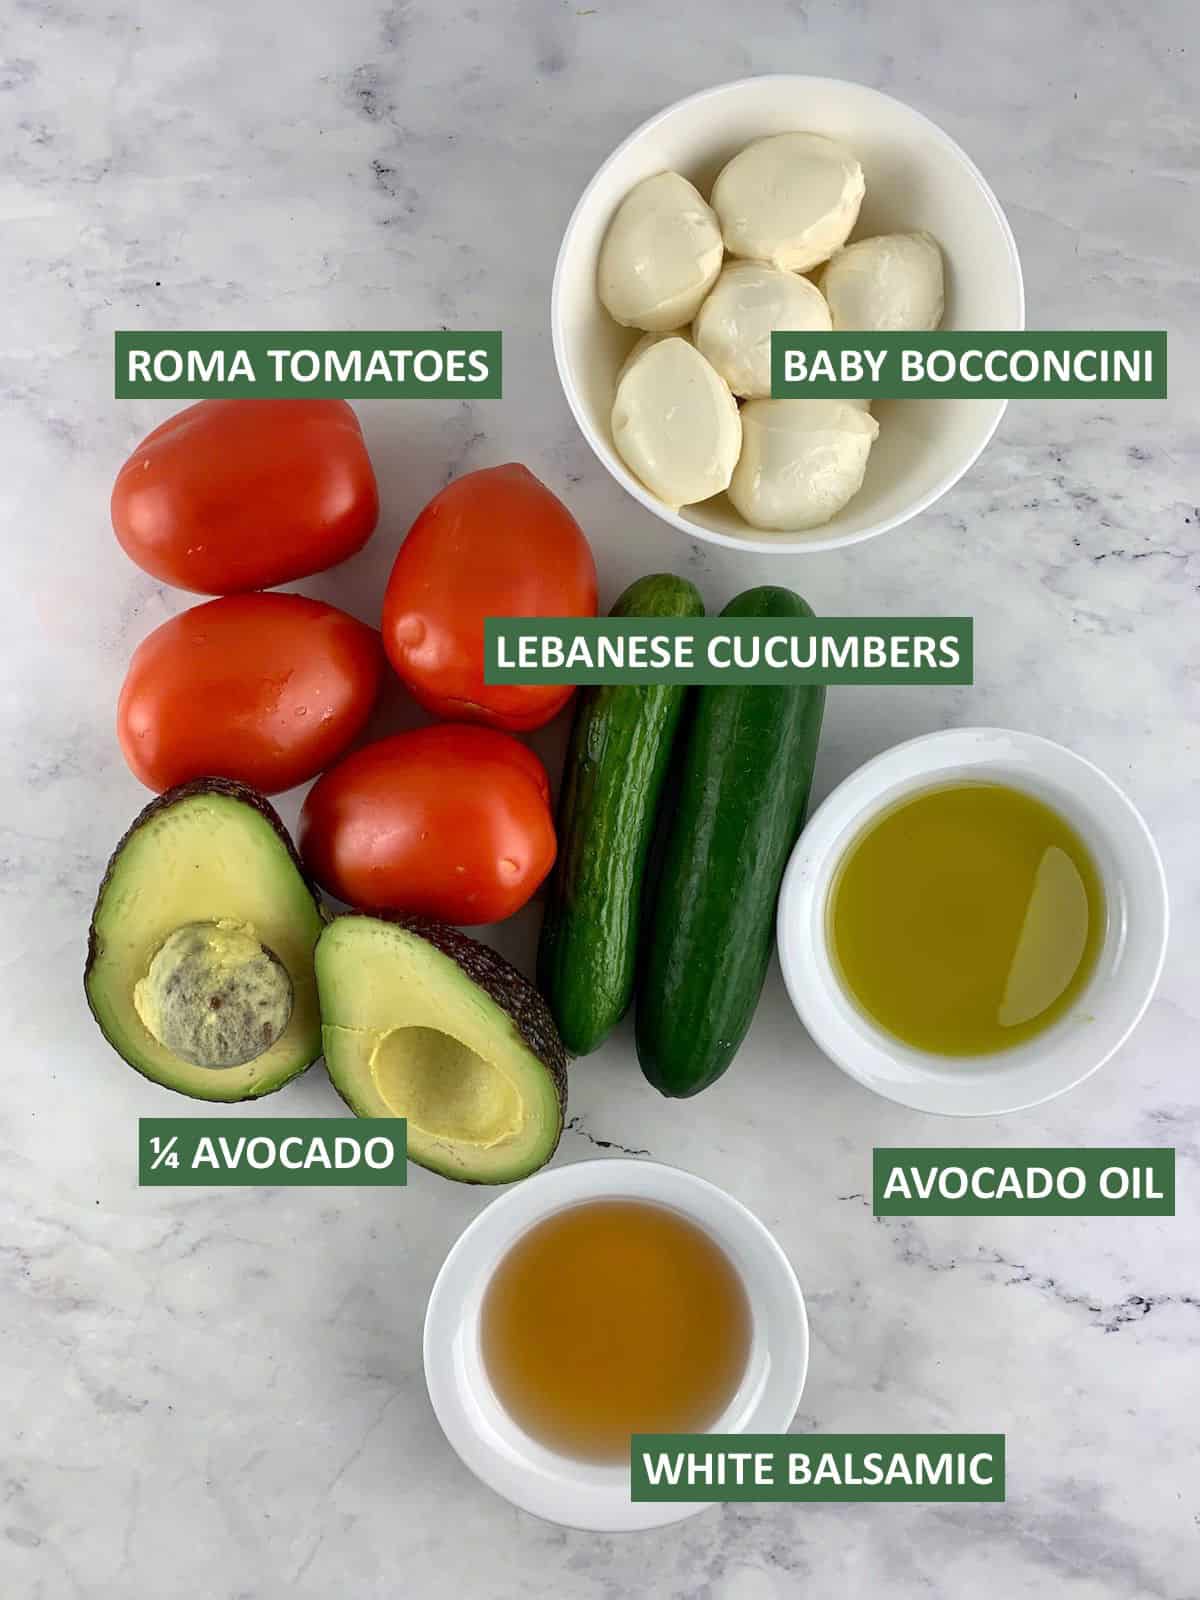 LABELLED INGREDIENTS NEEDED TO MAKE TRICOLORE SALAD